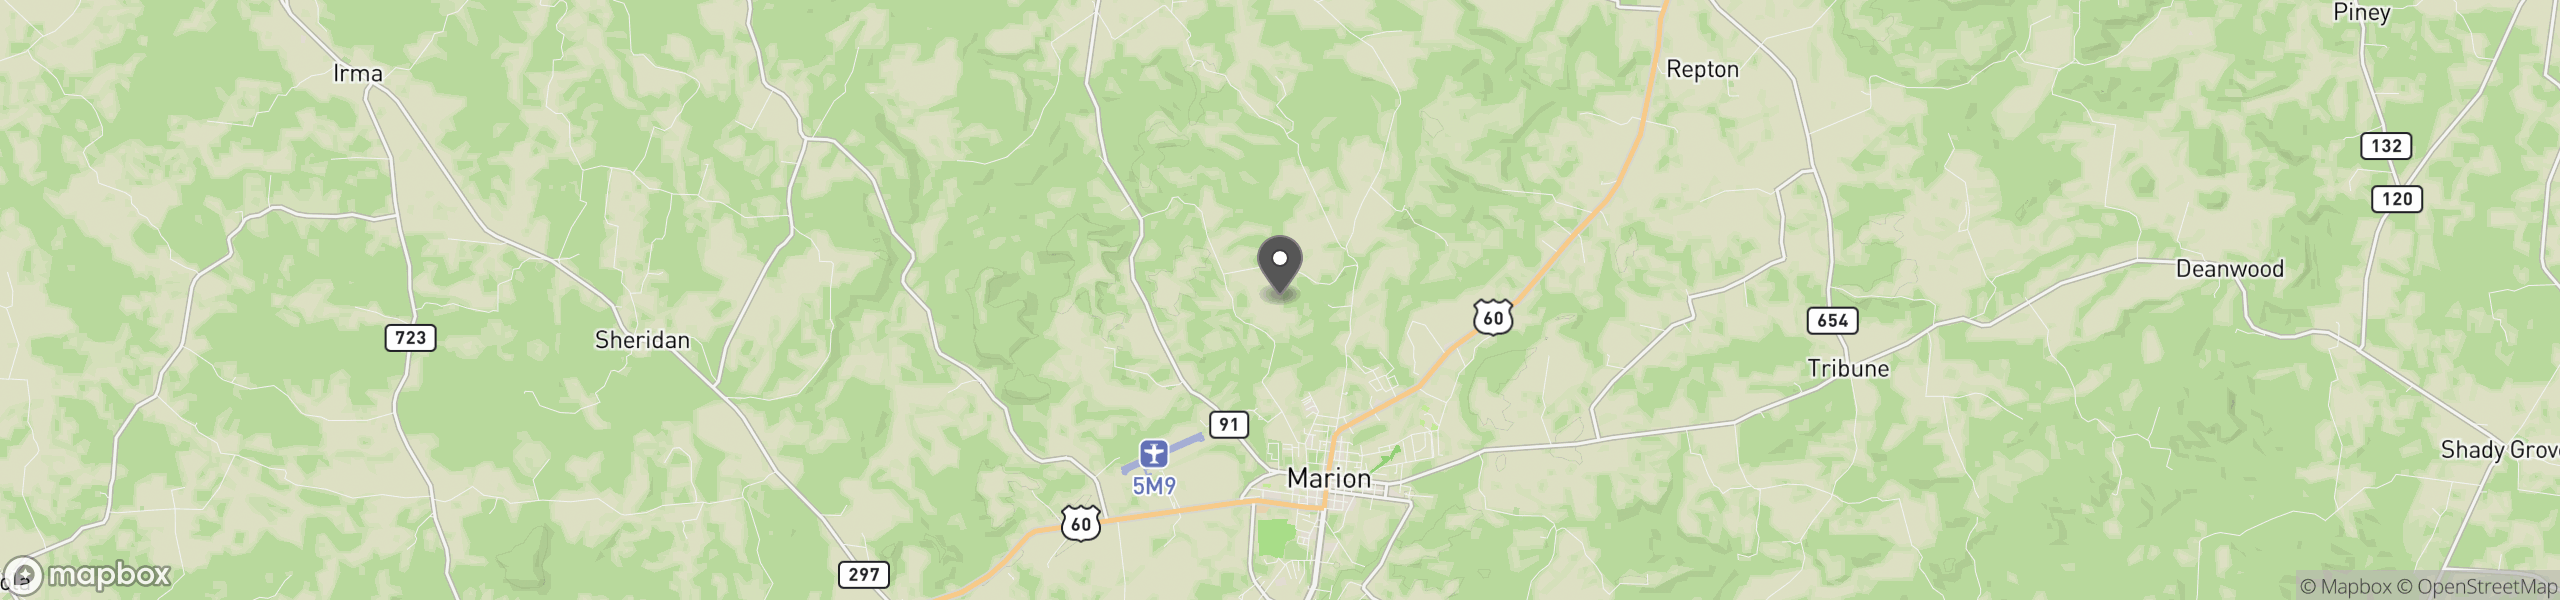 Marion, KY 42064